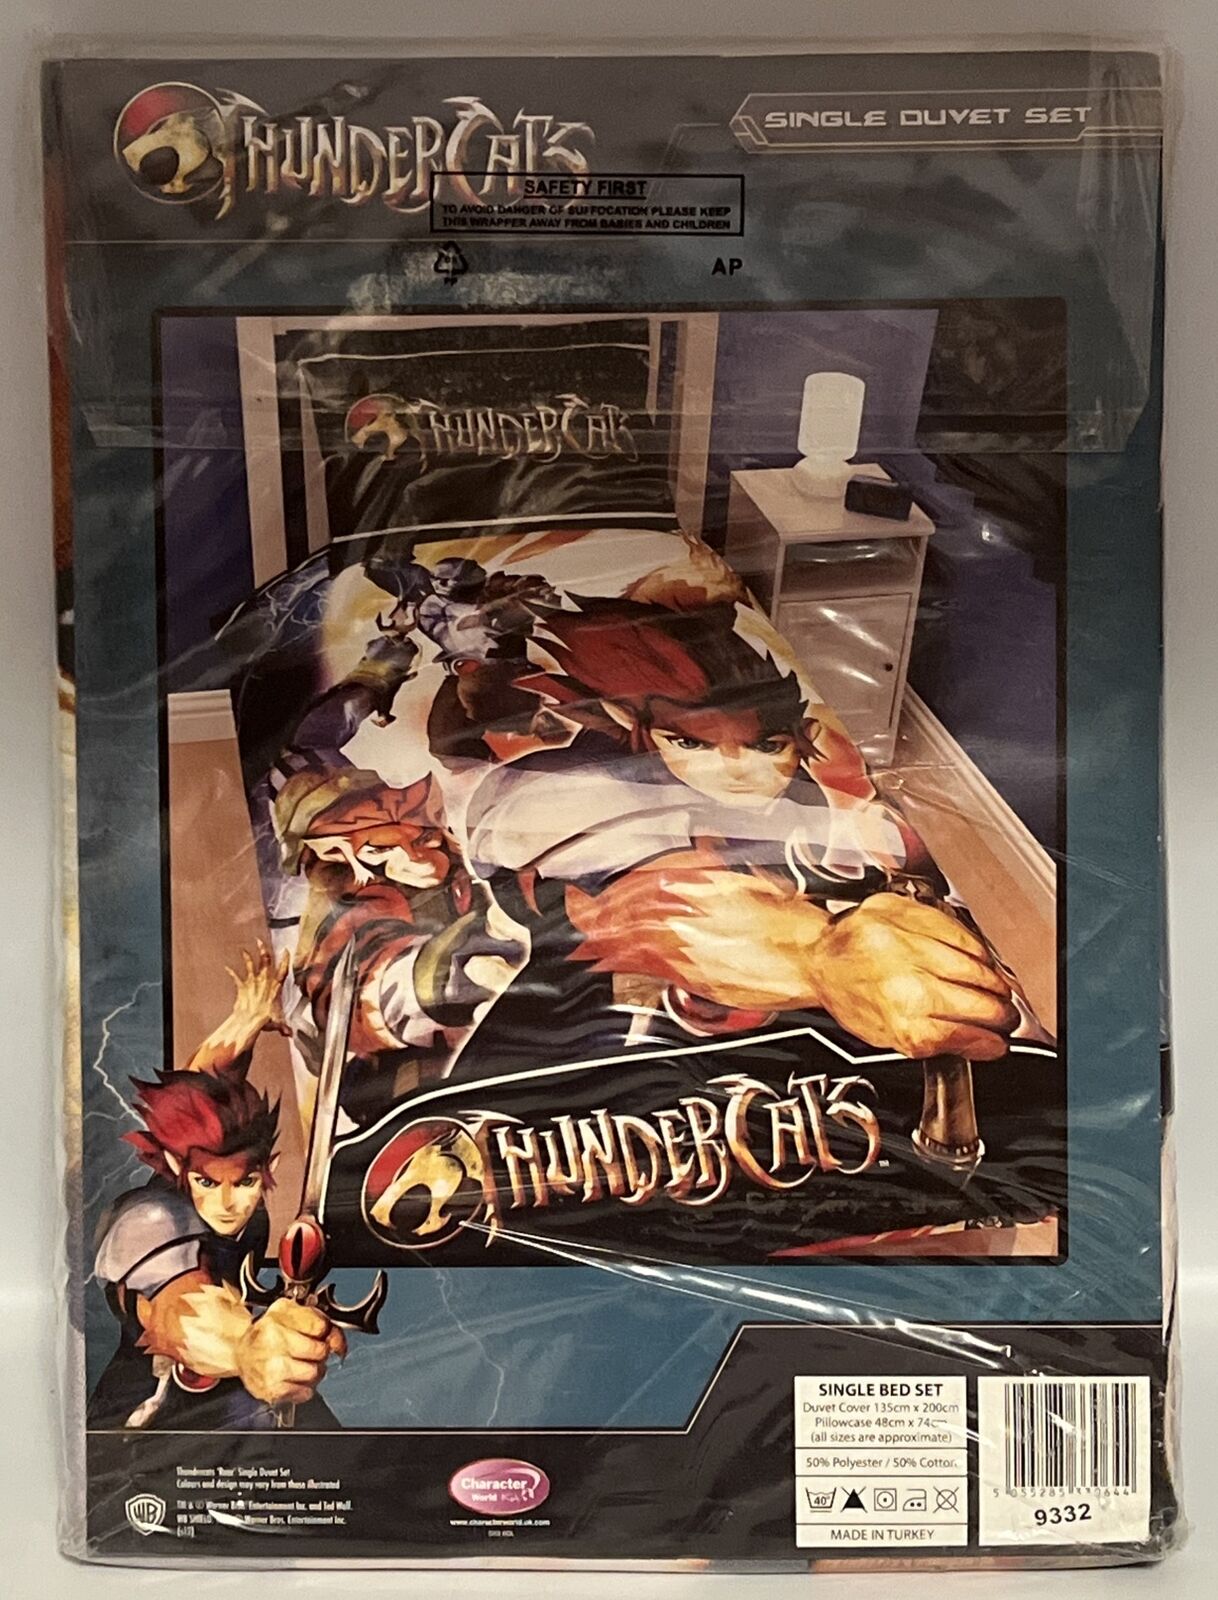 Thundercats Duvet Cover And Pillow Case - Single Bed Set - Warner Bros 2011